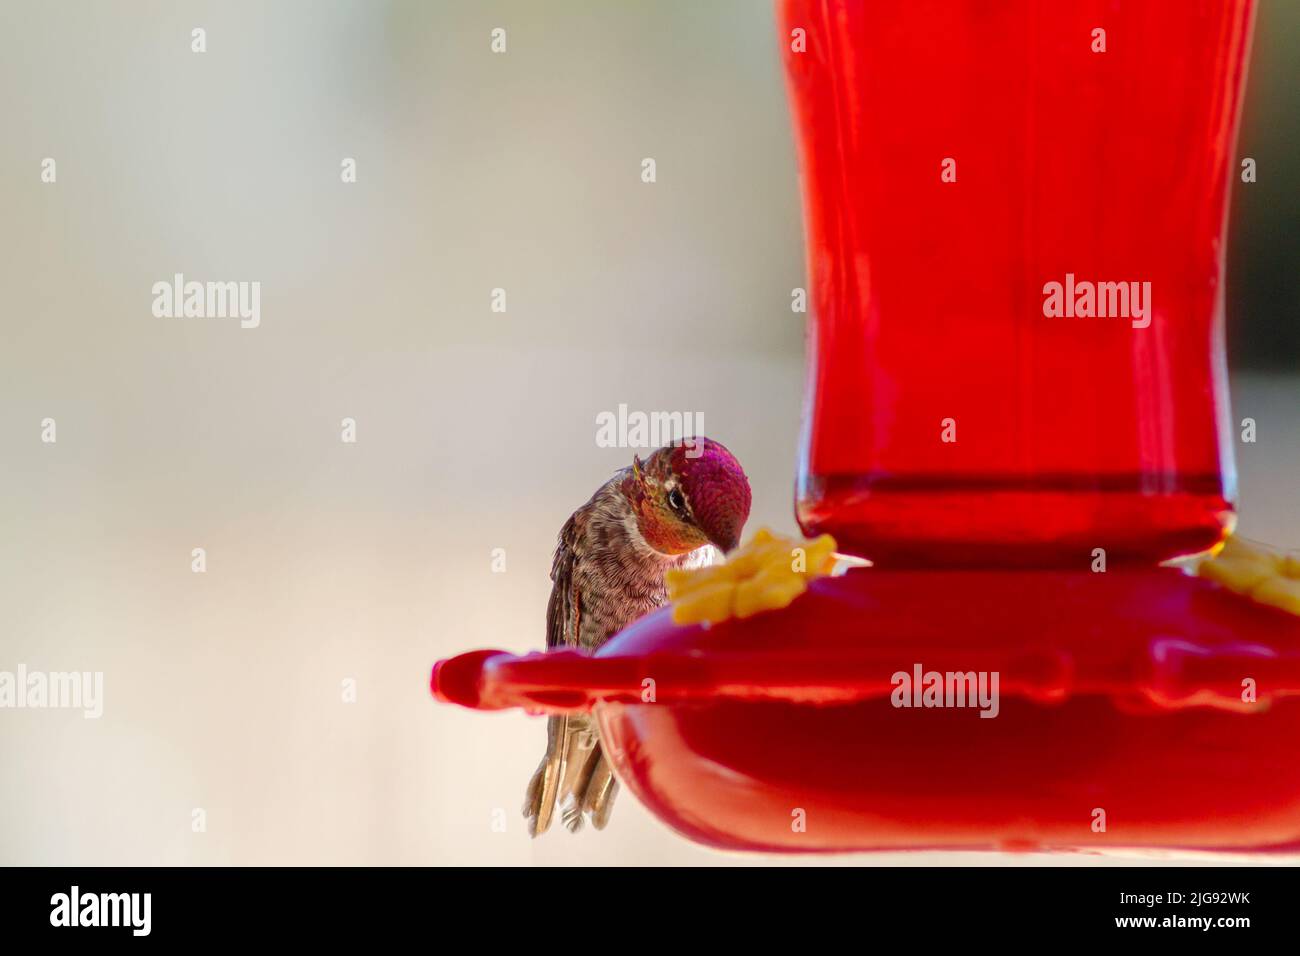 Hummingbird perched at a red feeder with copy space Stock Photo